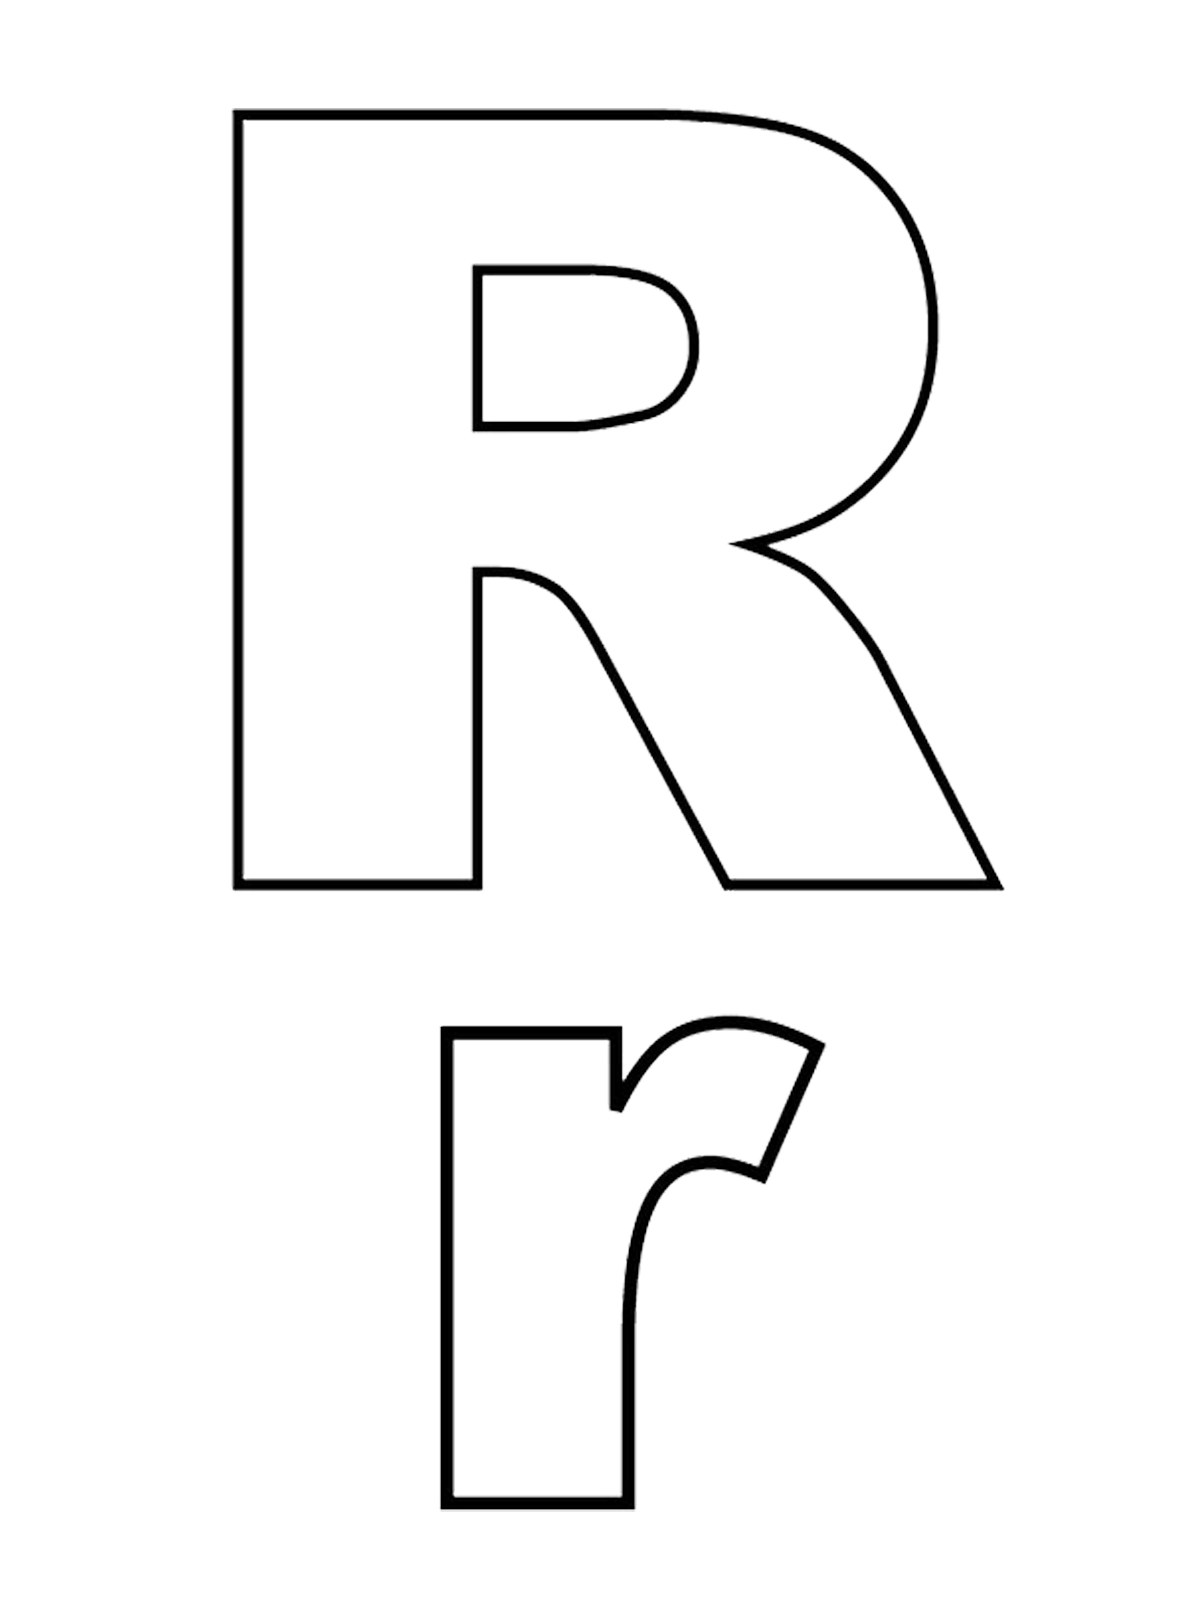 Letters and numbers - Letter R capital letters and lowercase